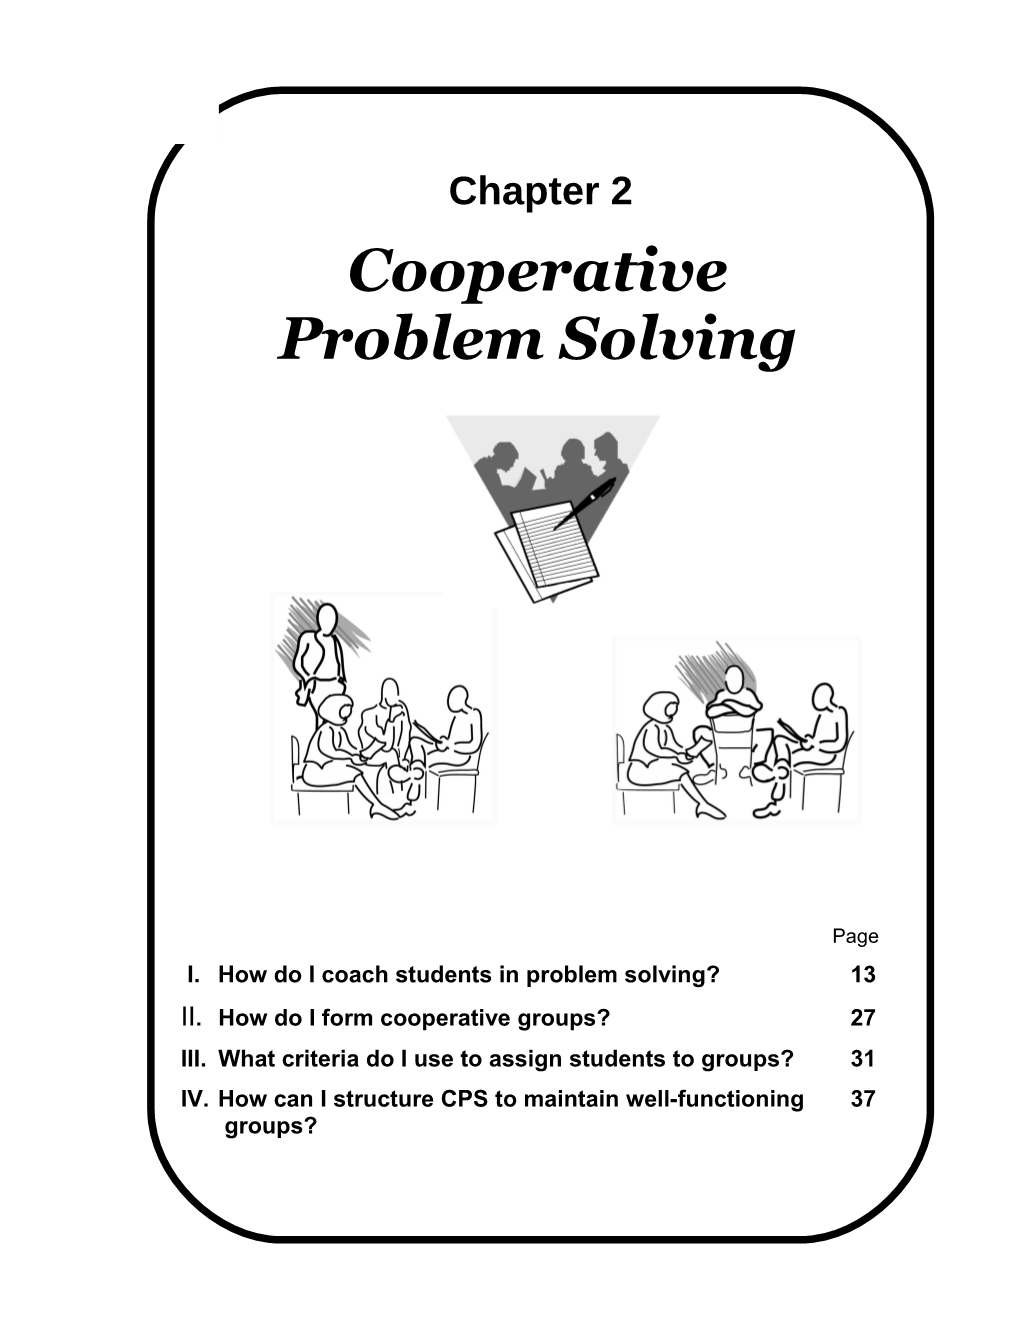 I.How Do I Coach Students in Problem Solving?13